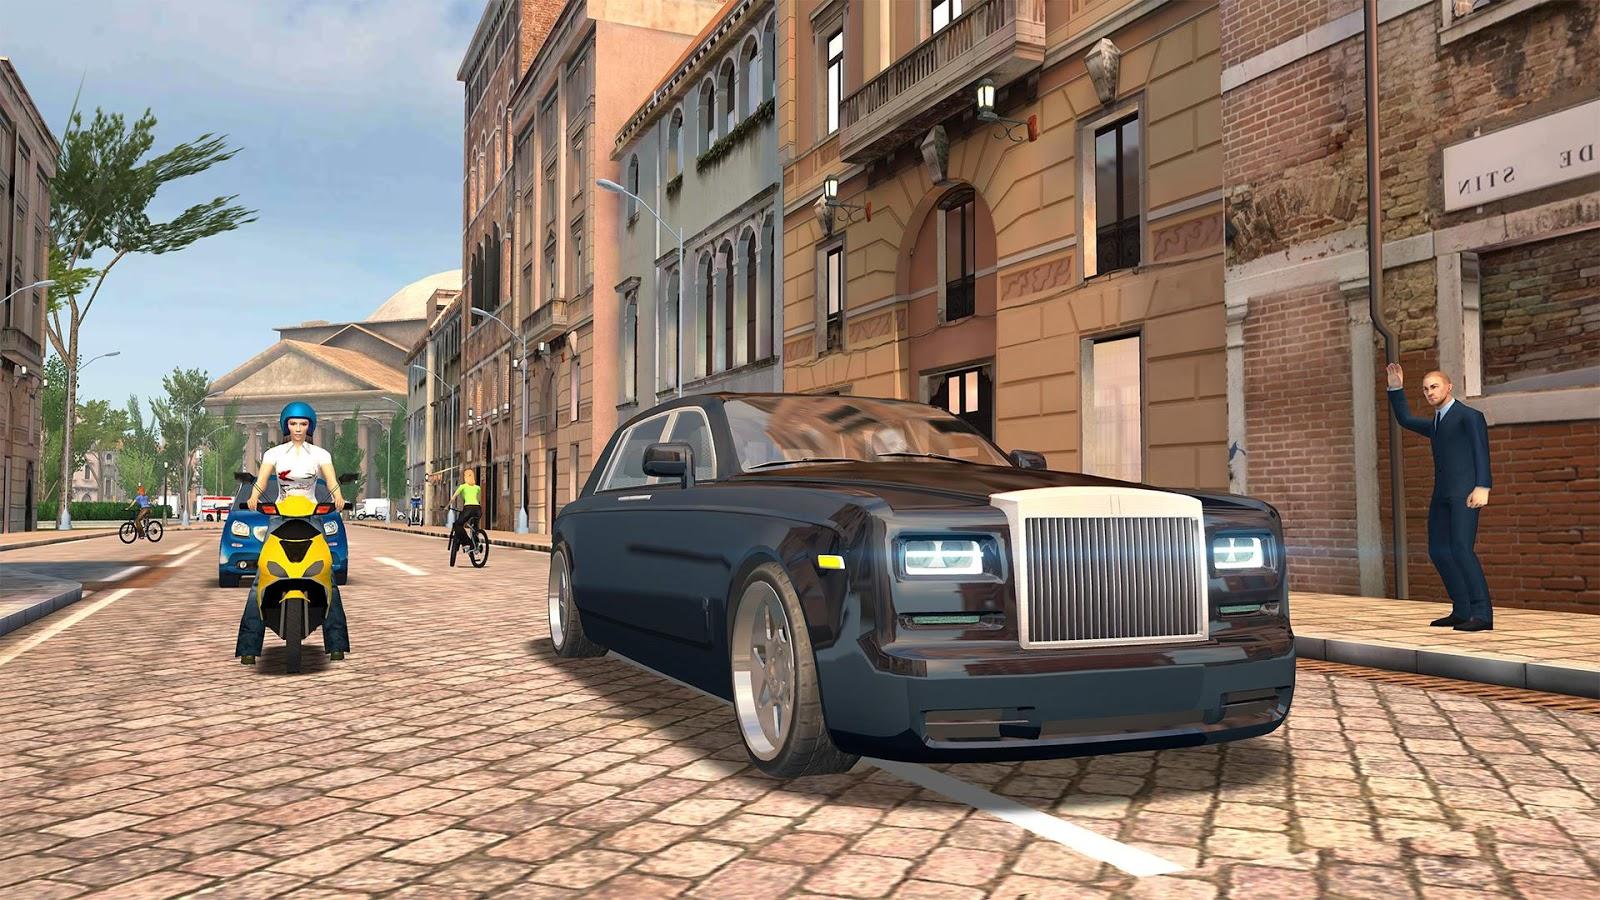 Taxi Sim 2020 Apk Obb Download Myappsmall Provide Online Download Android Apk And Games